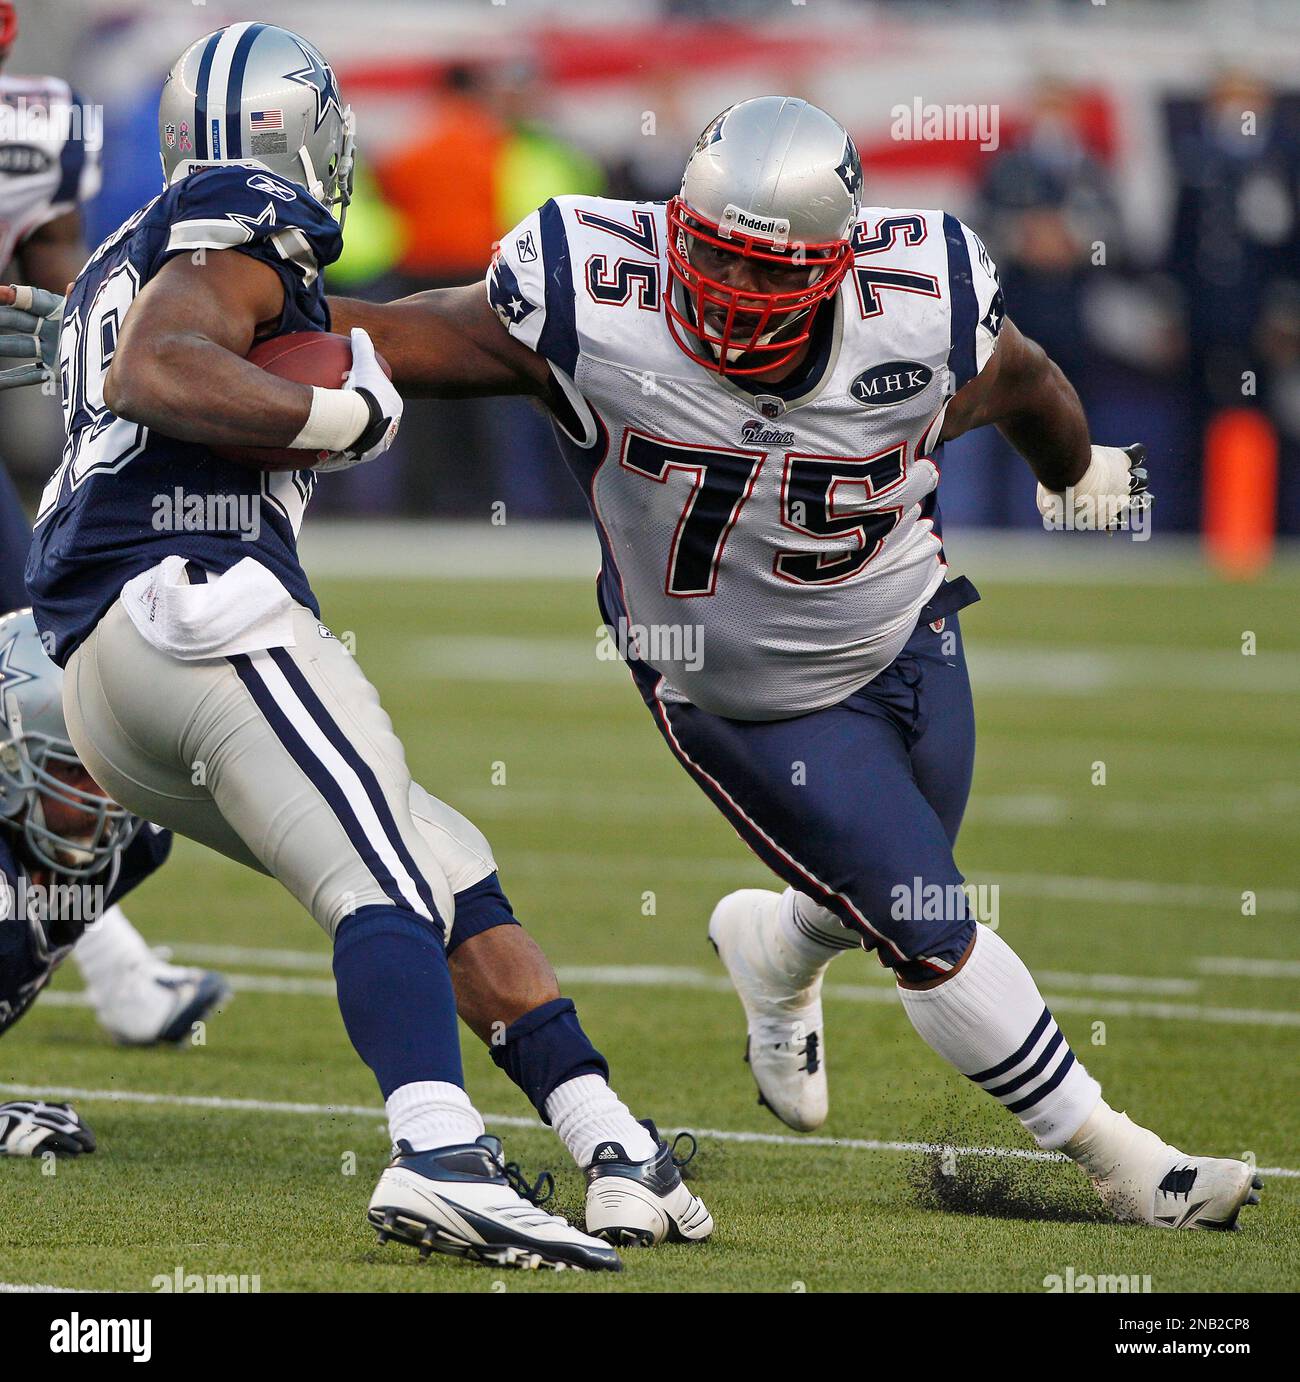 Oct. 16, 2011 - Foxborough, Massachusetts, U.S - New England Patriots NT Vince  Wilfork (75) in his 3 point stance. The New England Patriots defeat the  Dallas Cowboys 20 - 16 at